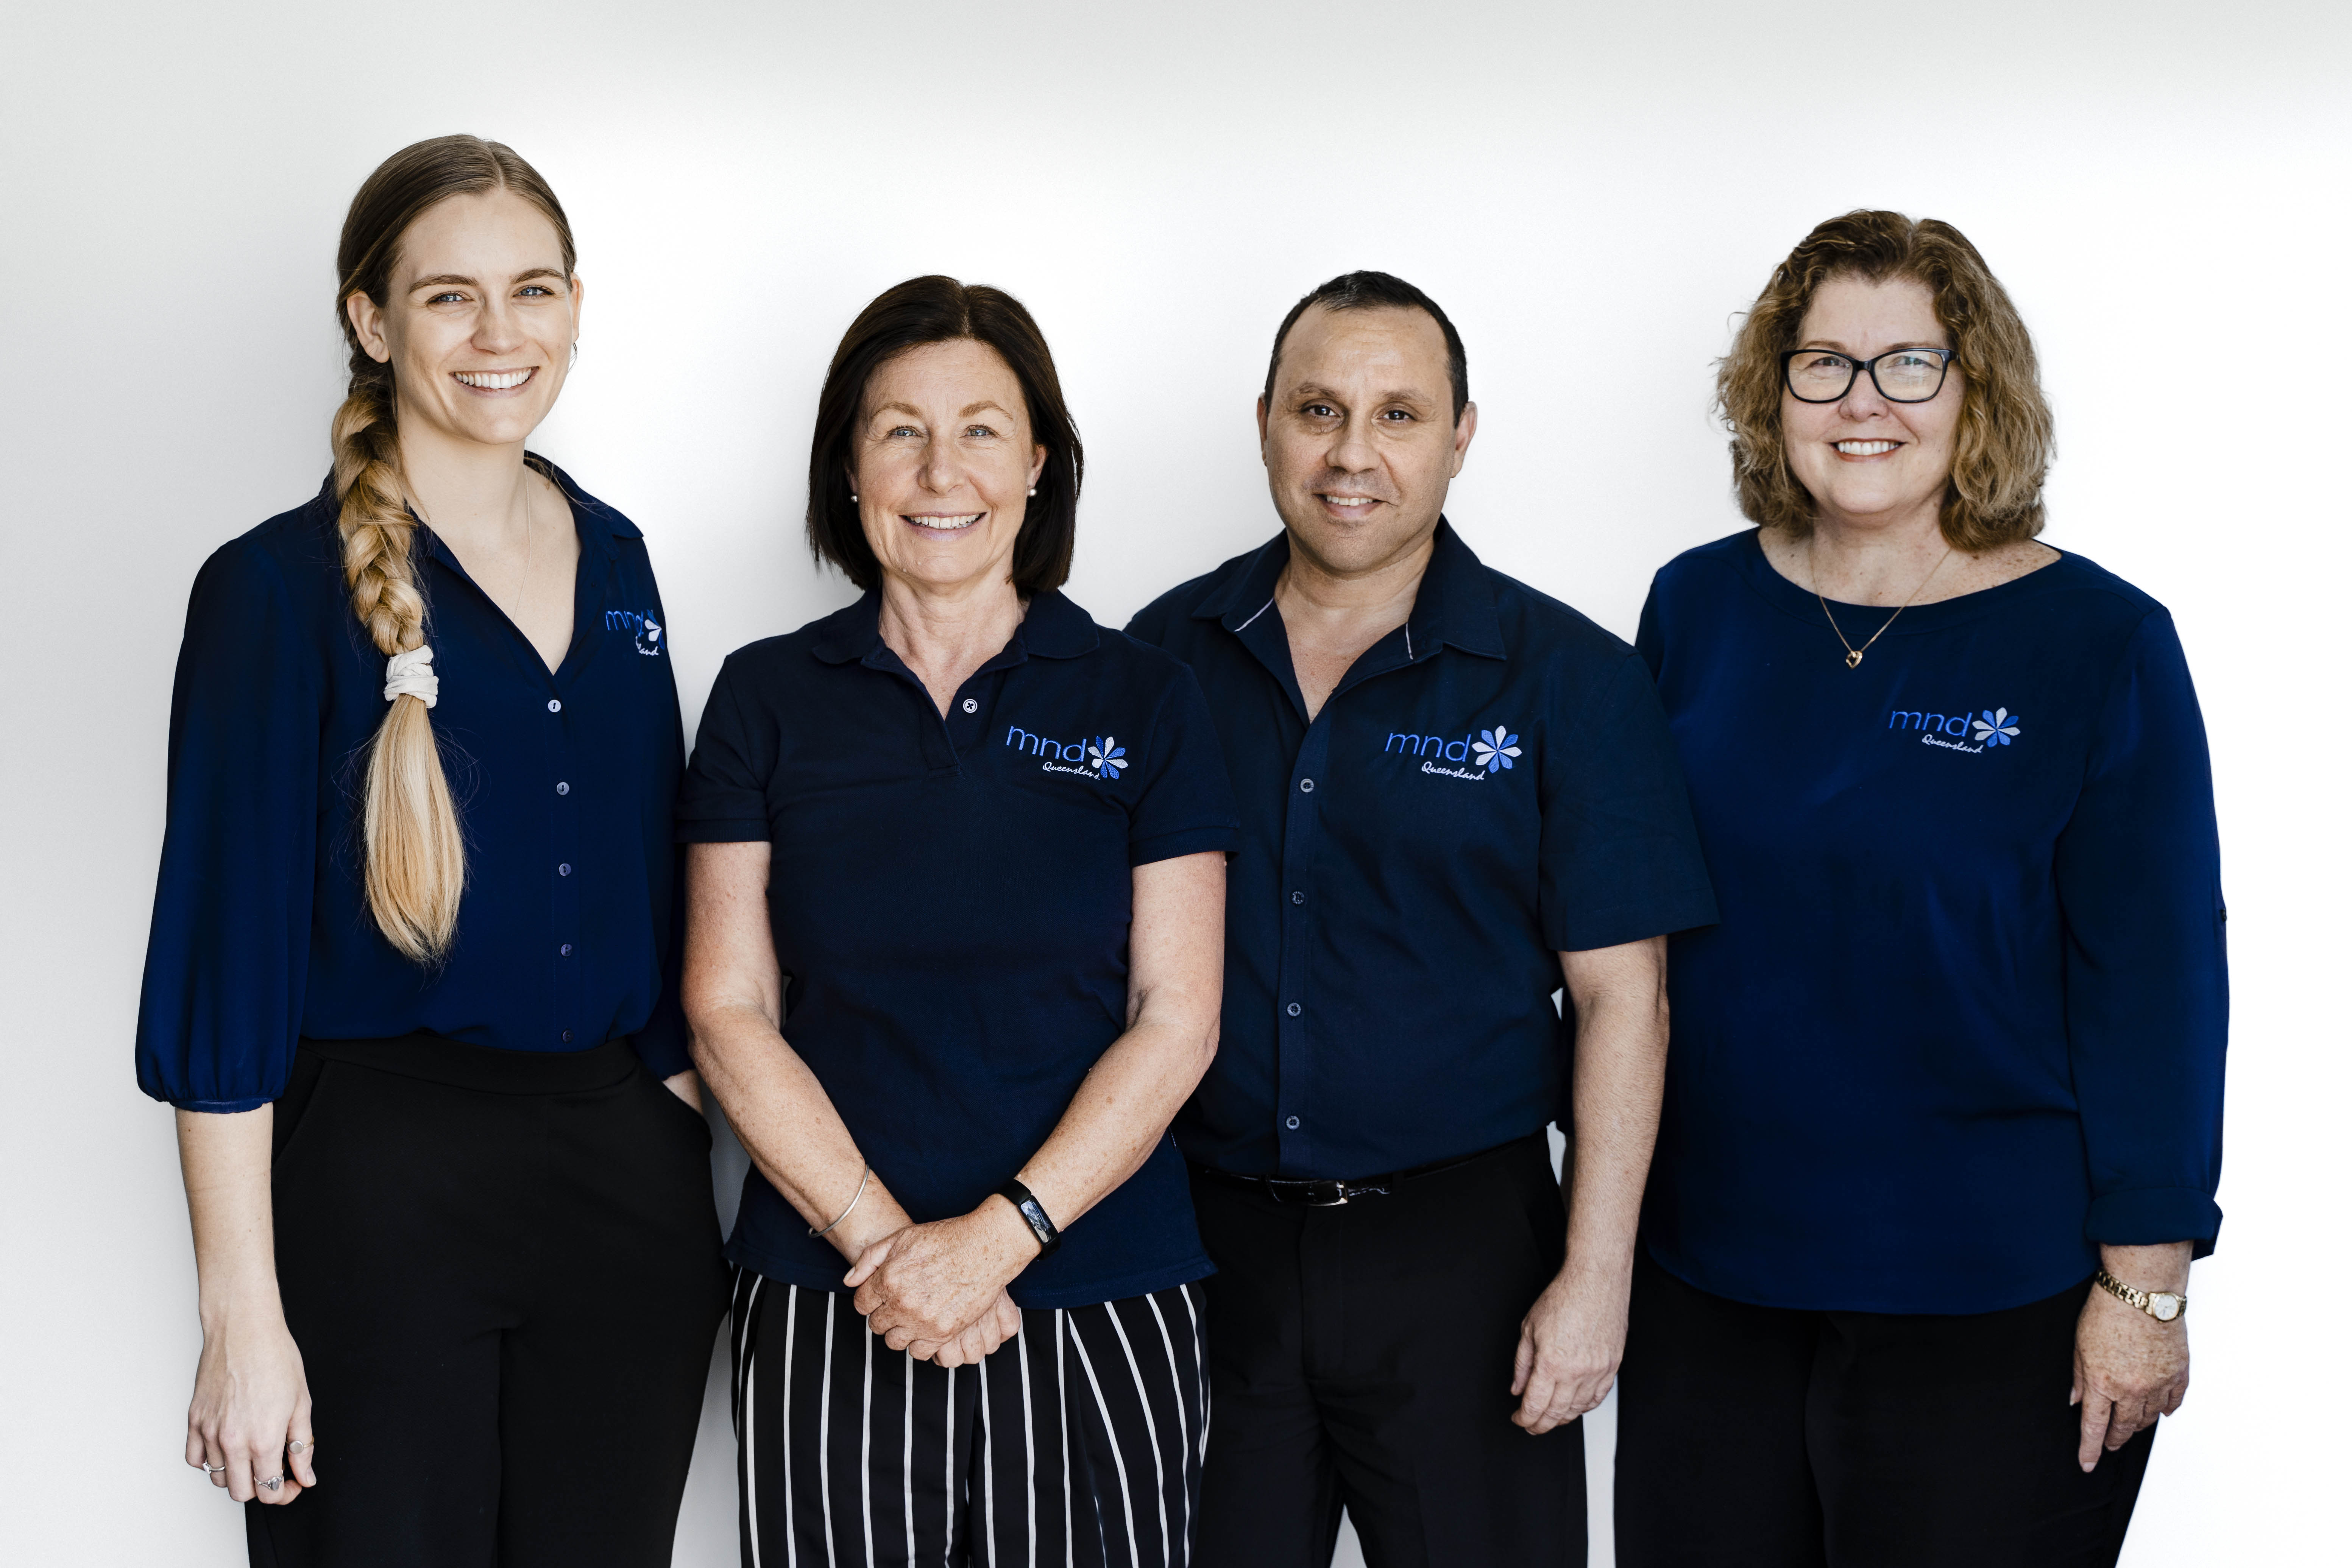 MND Queensland's MND Advisors/NDIS Support Coordinators. Supporting people diagnosed with Motor Neurone Disease across the State.